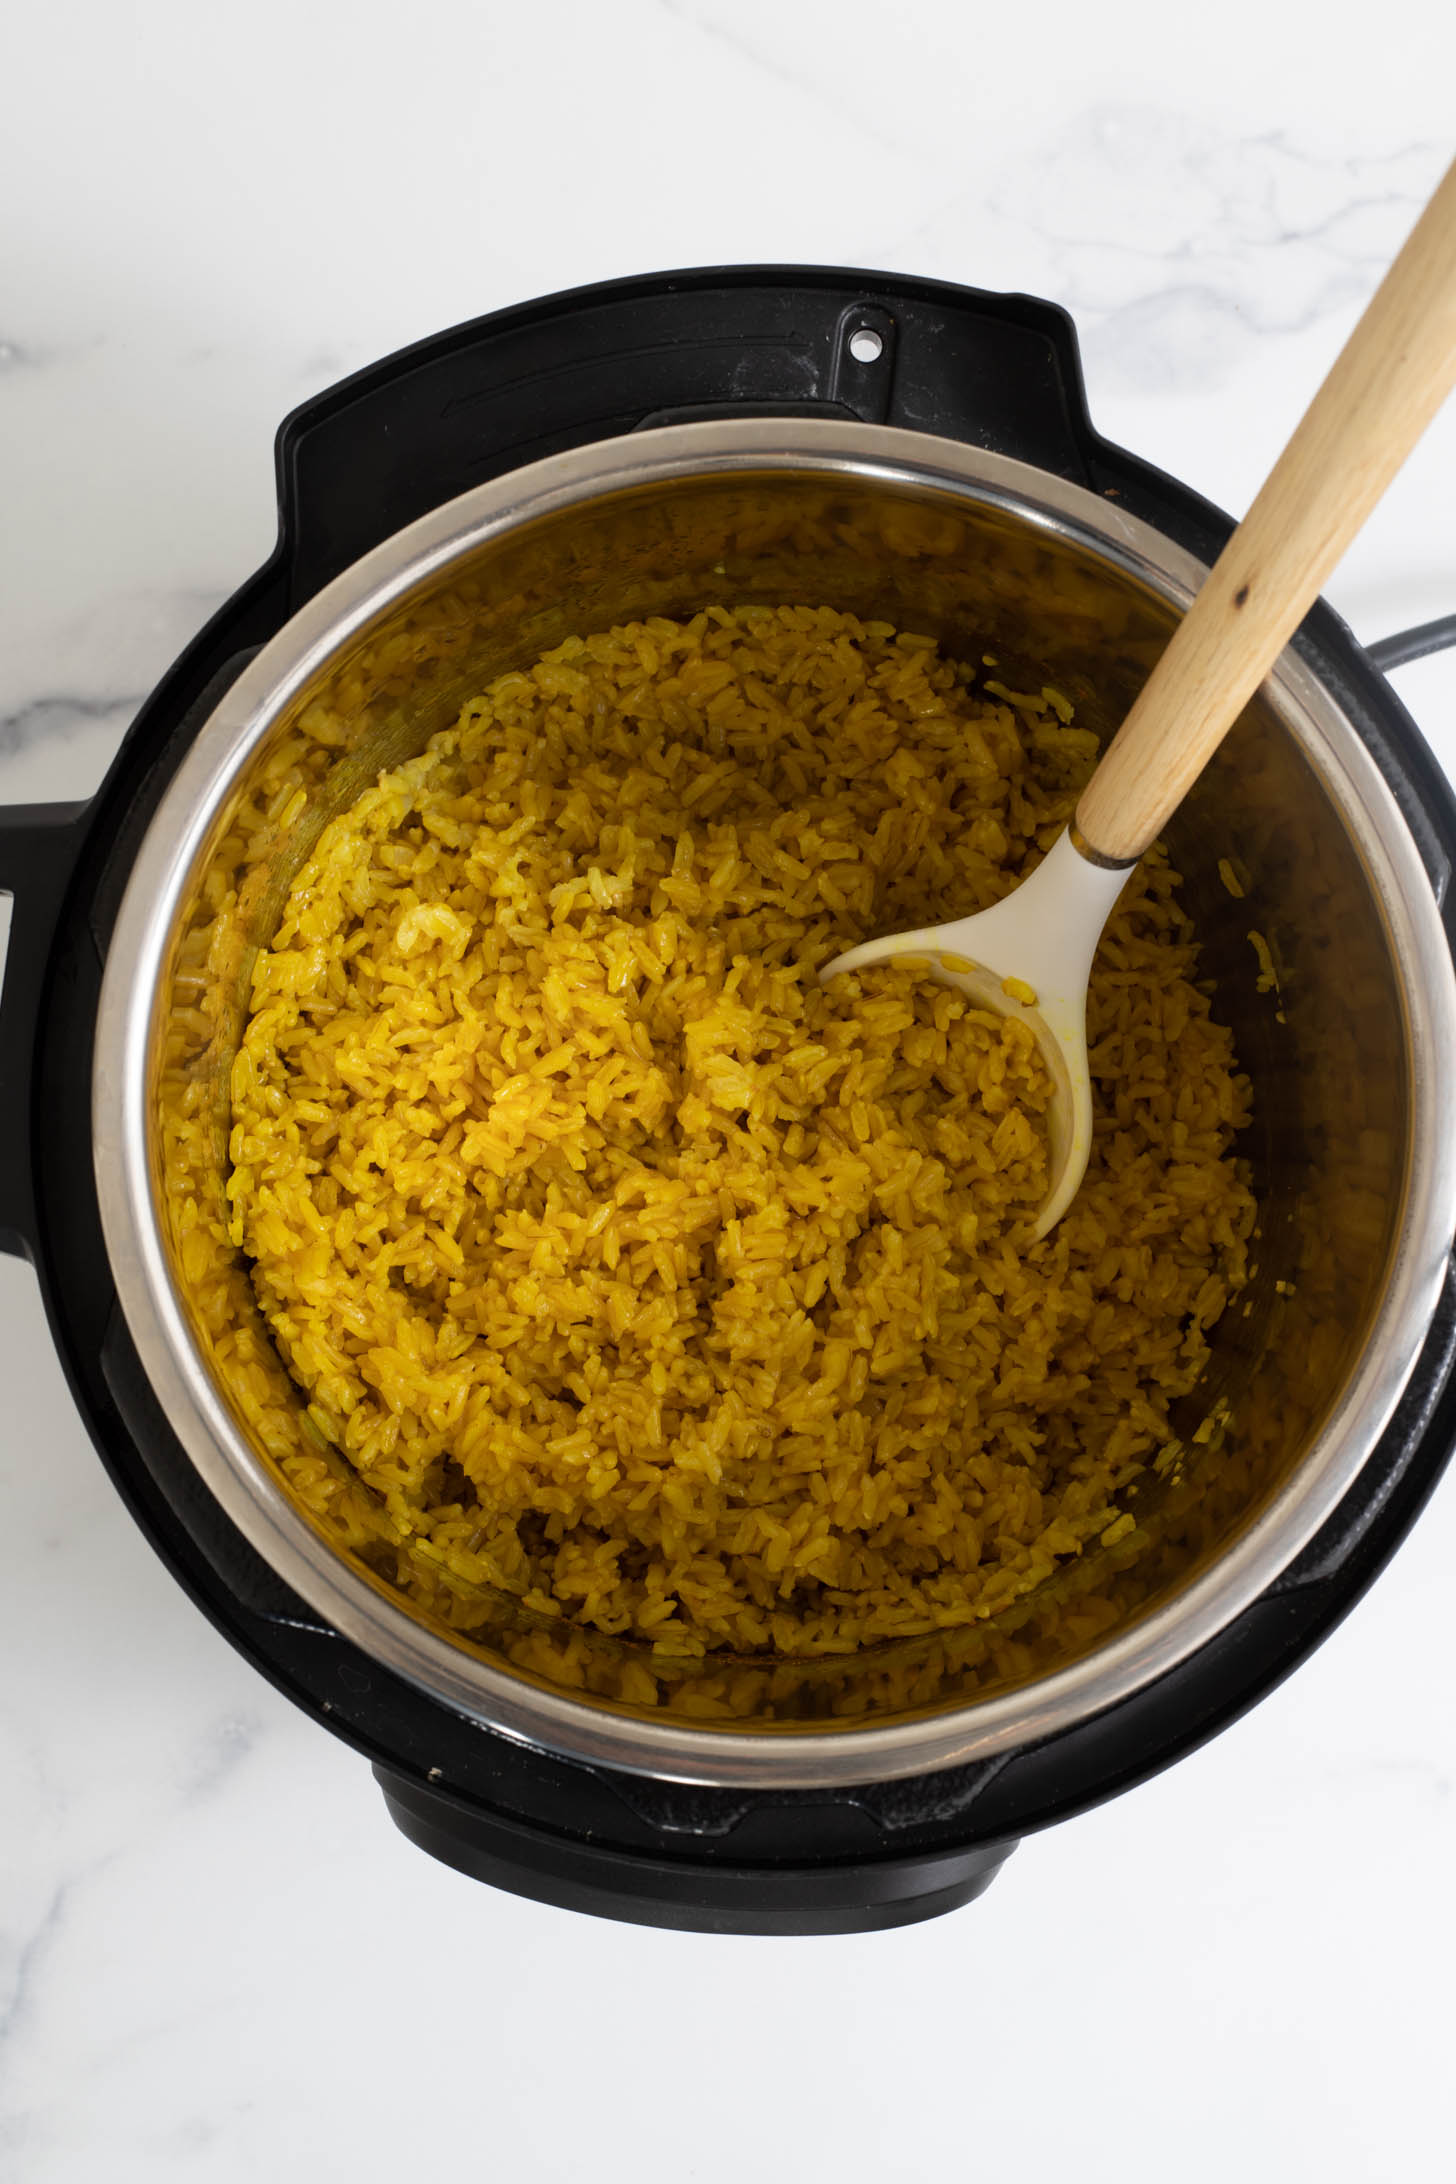 Turmeric Rice finished cooking in an Instant Pot.